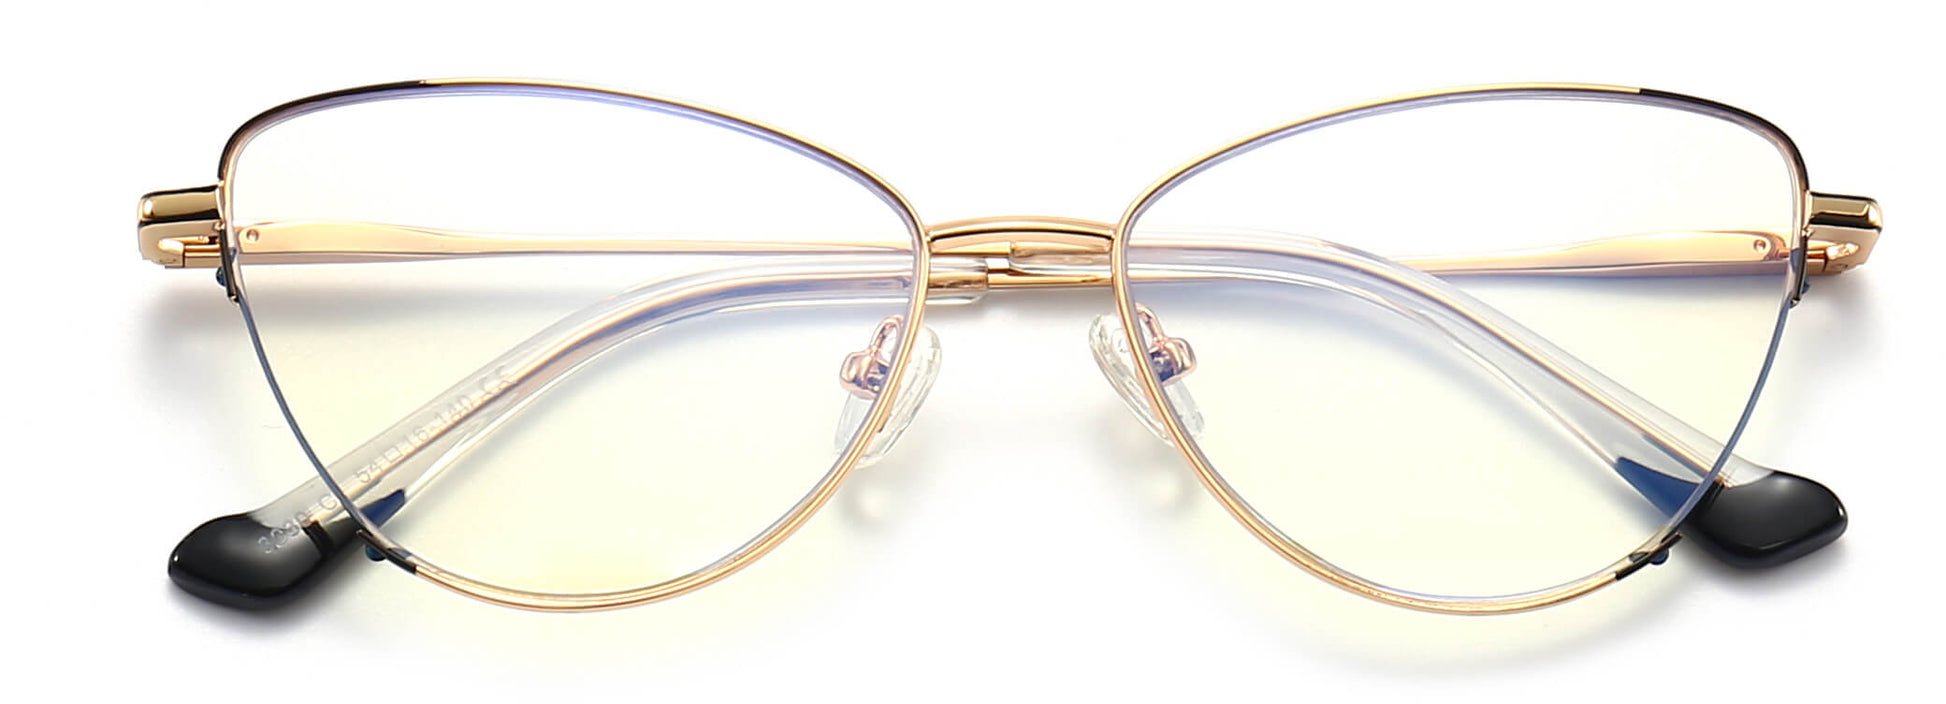 Indie Cateye Gold Eyeglasses from ANRRI, closed view